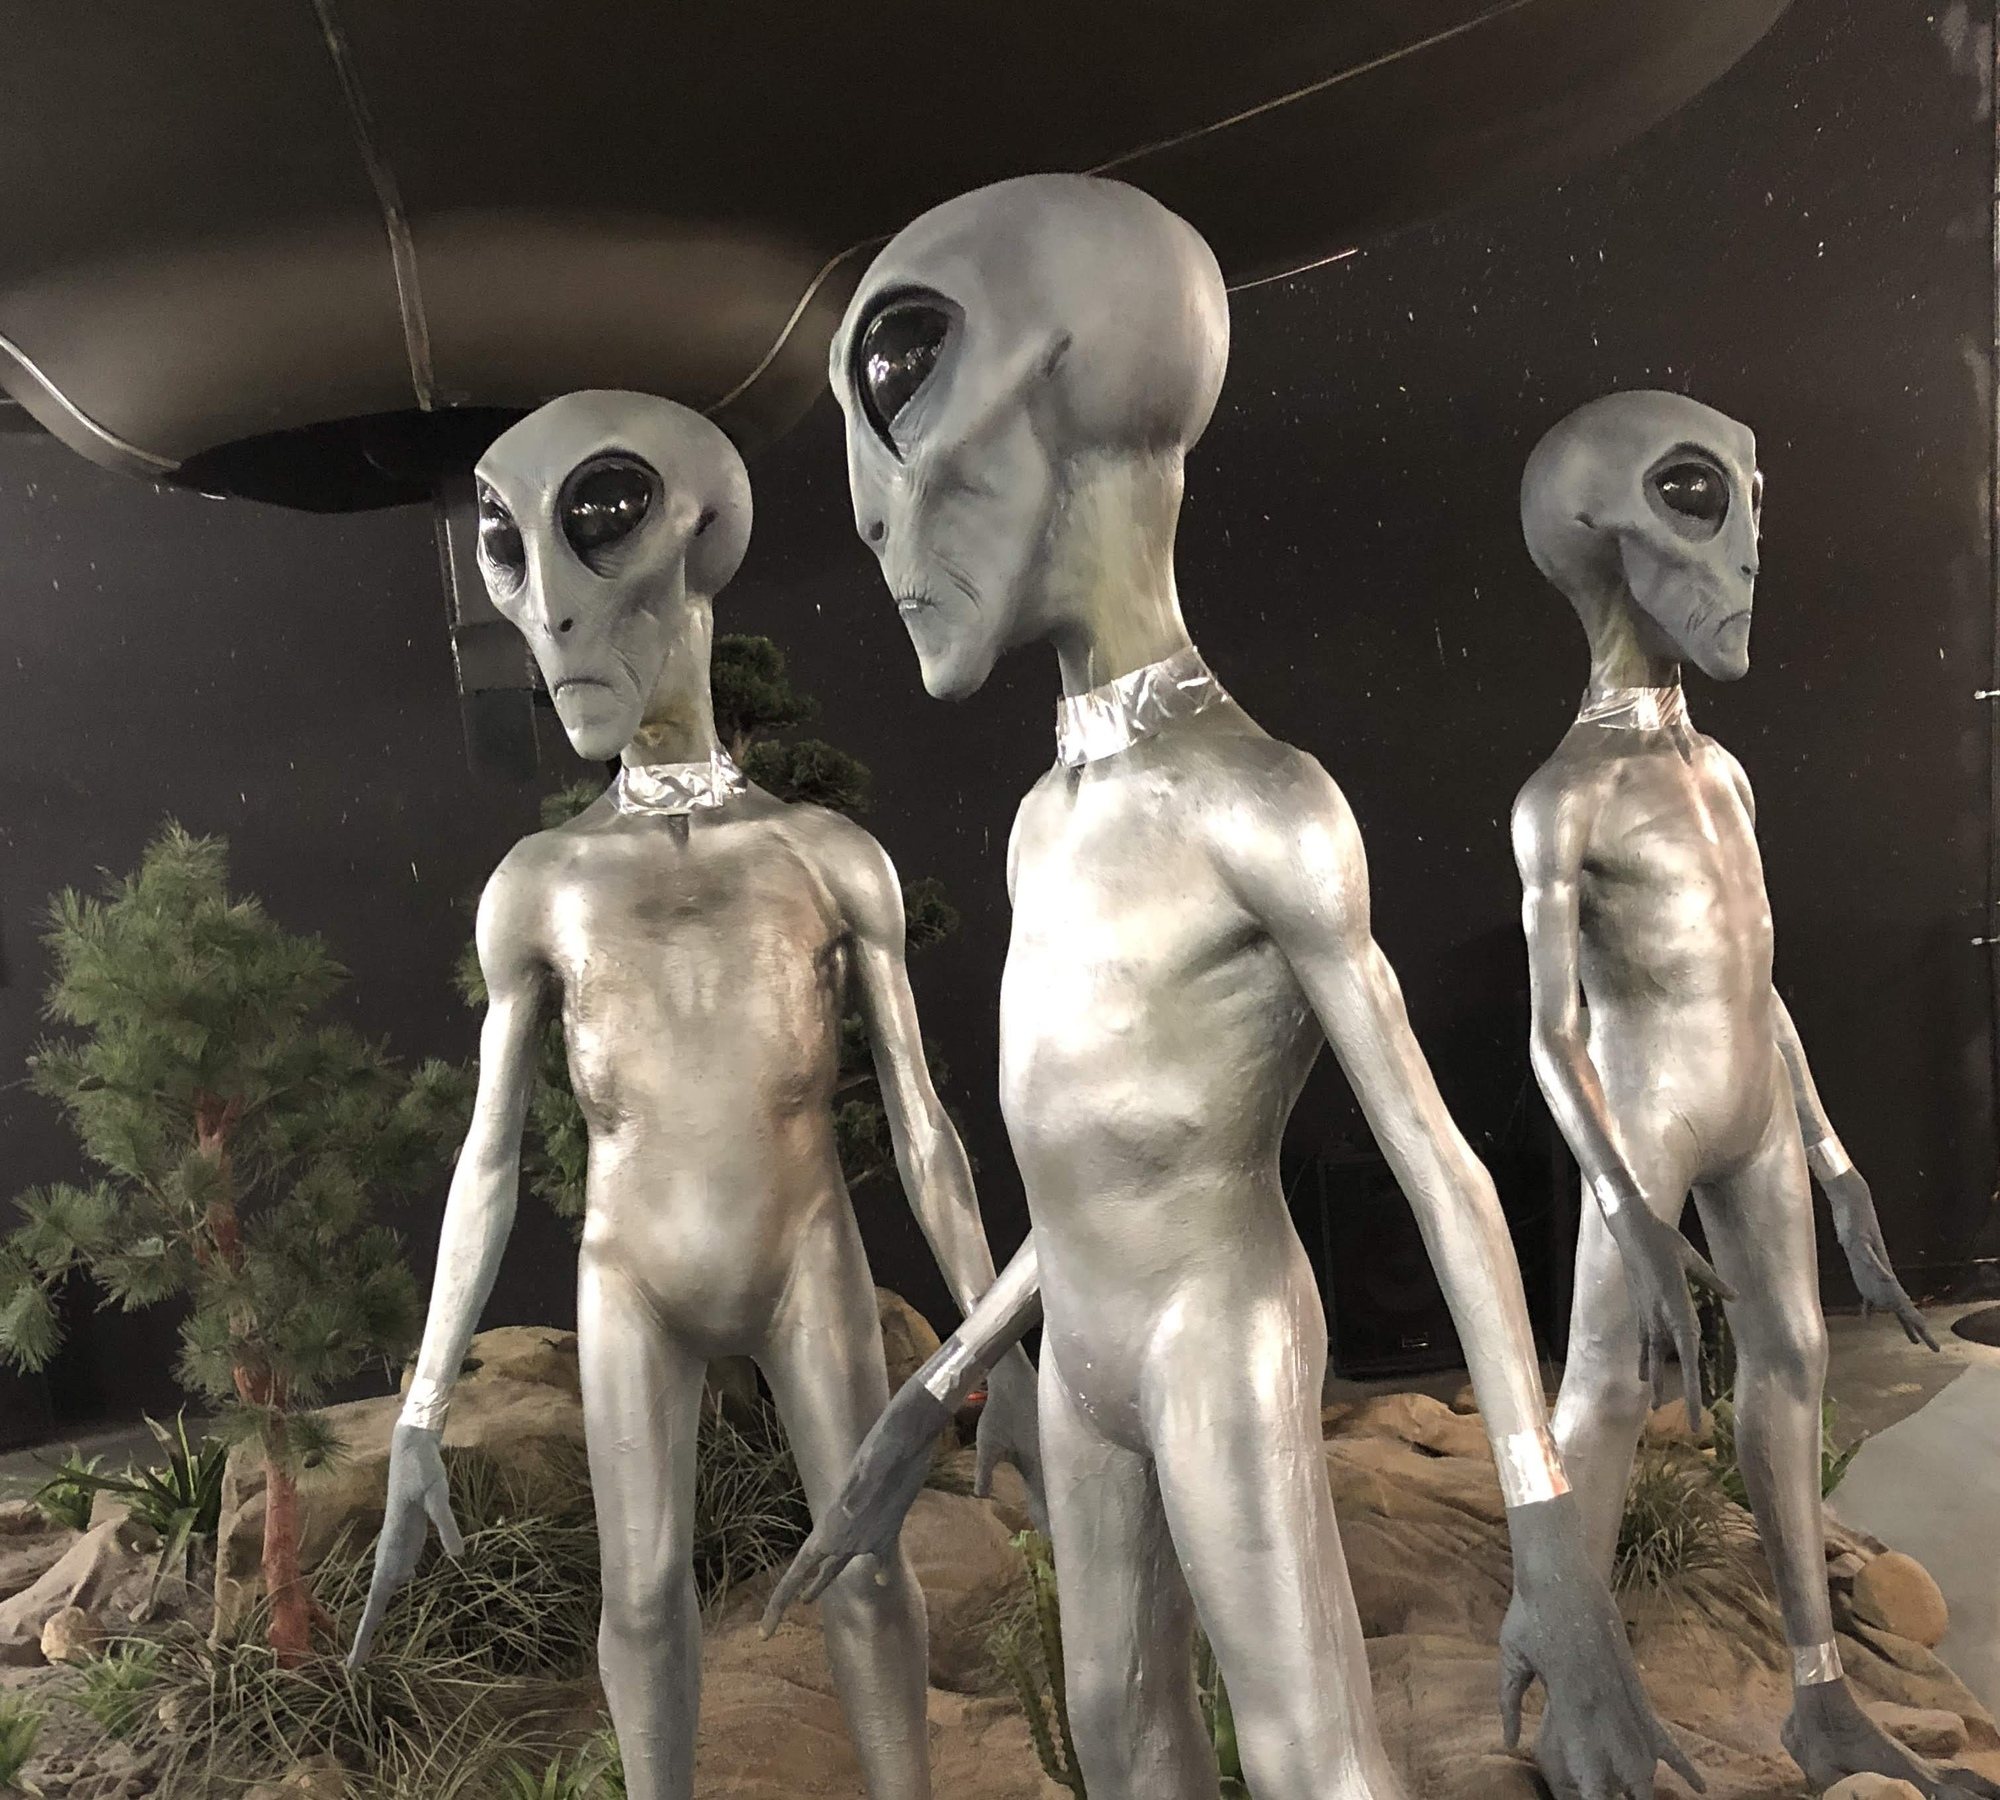 Bring an Alien Home from Roswell, New Mexico